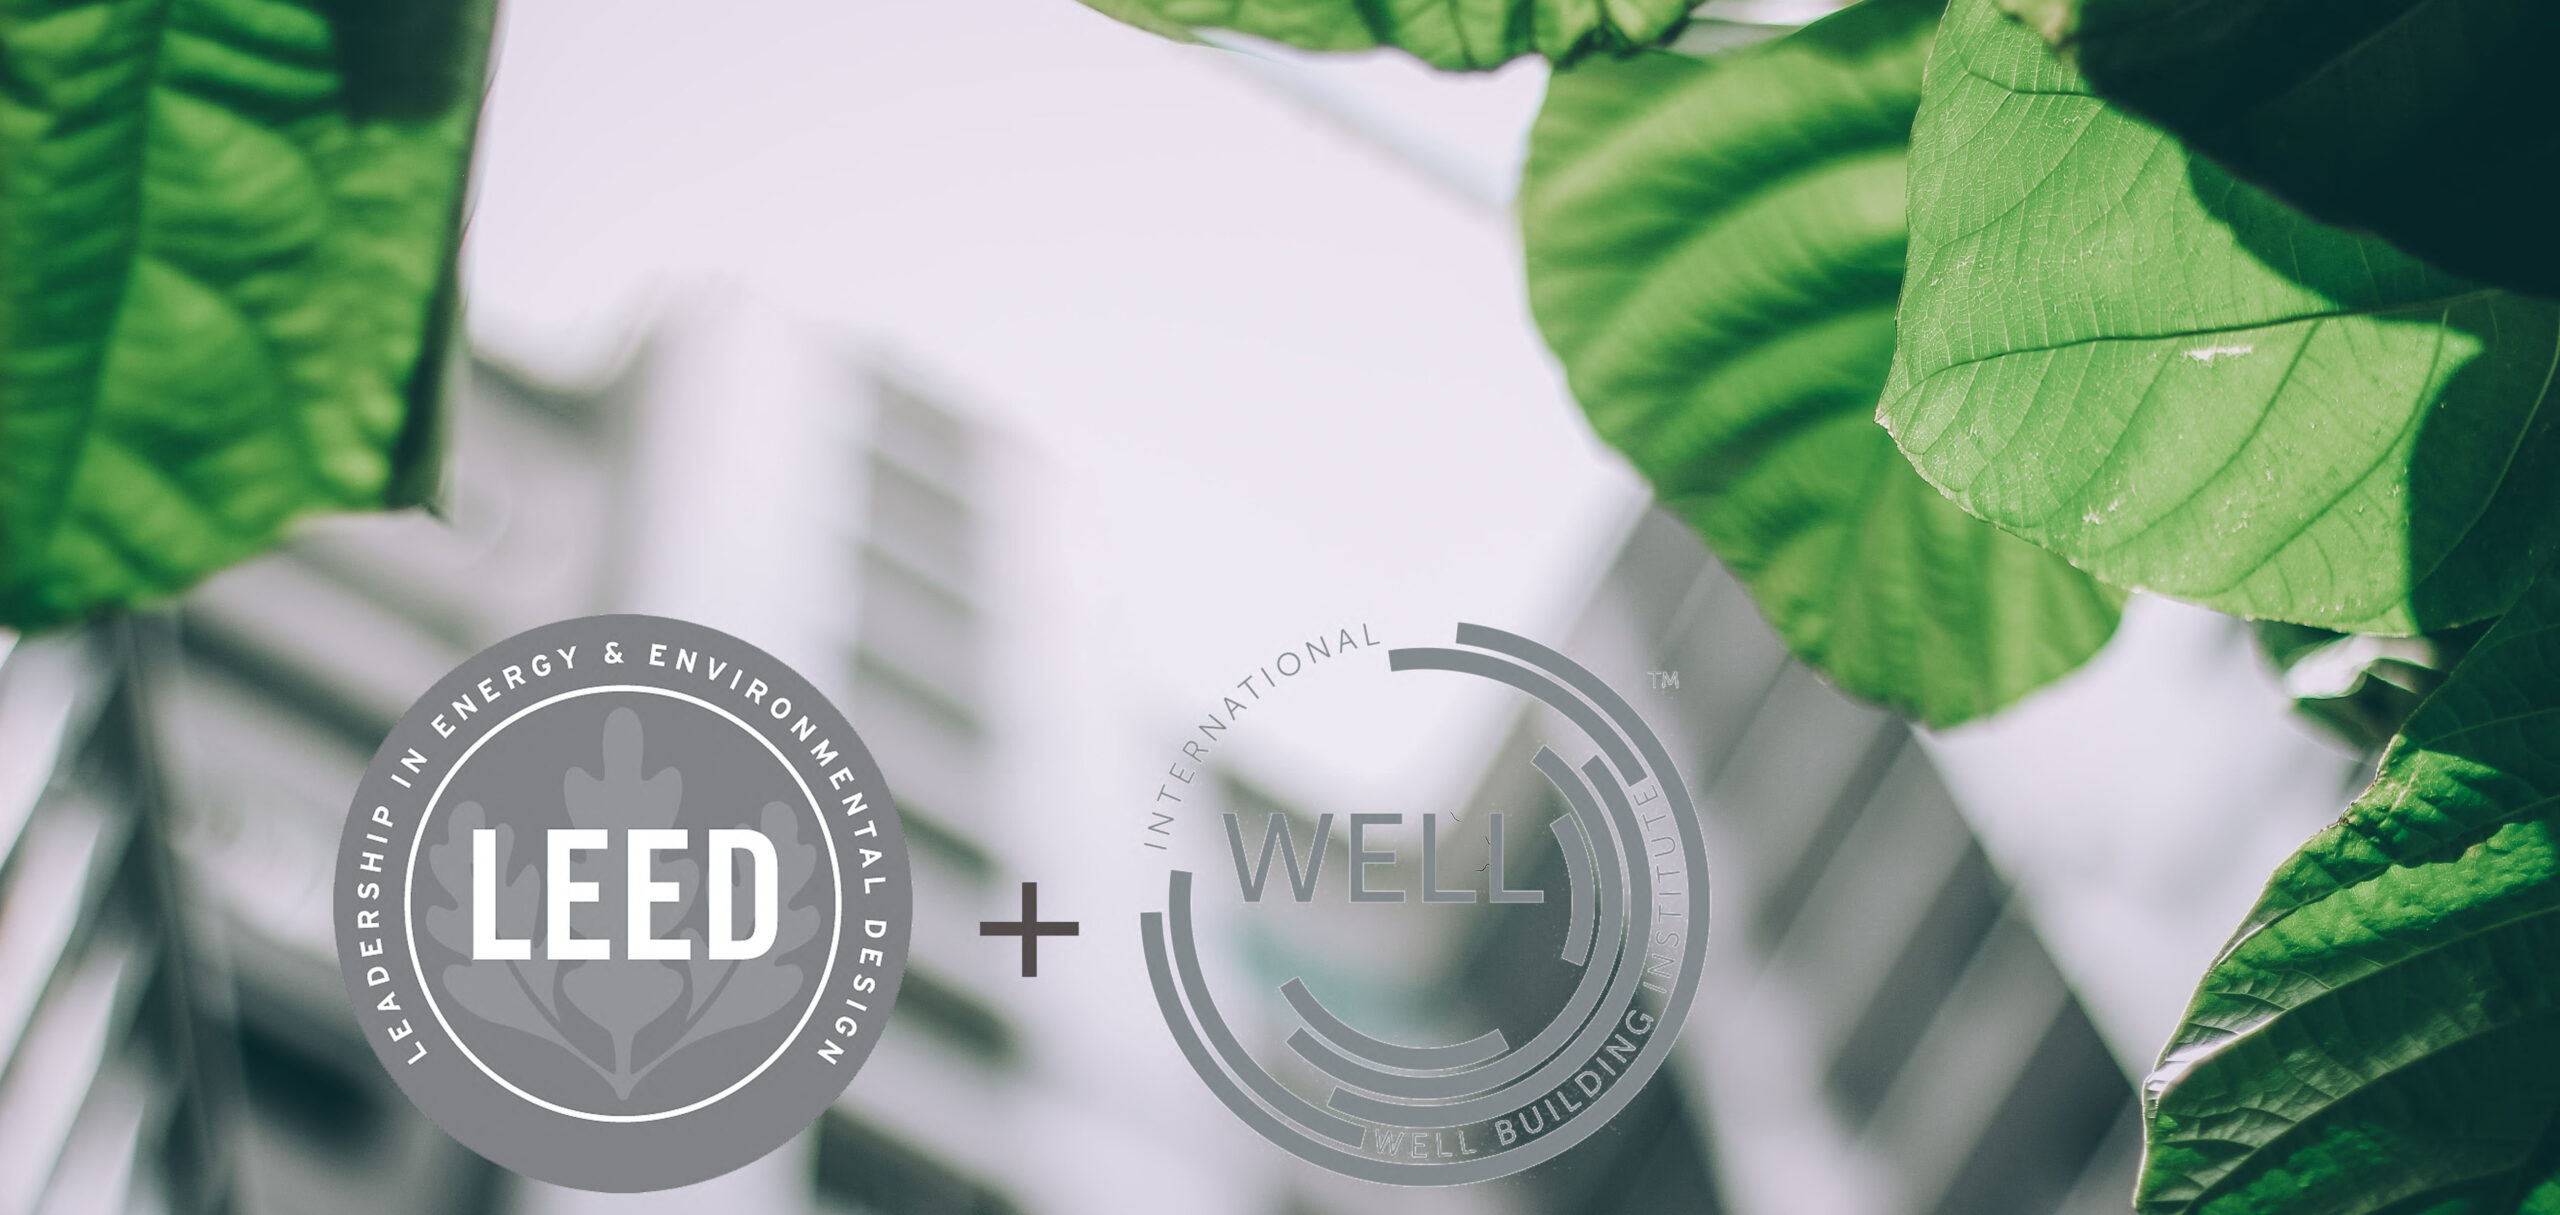 LEED and WELL Streamlined Certification Process